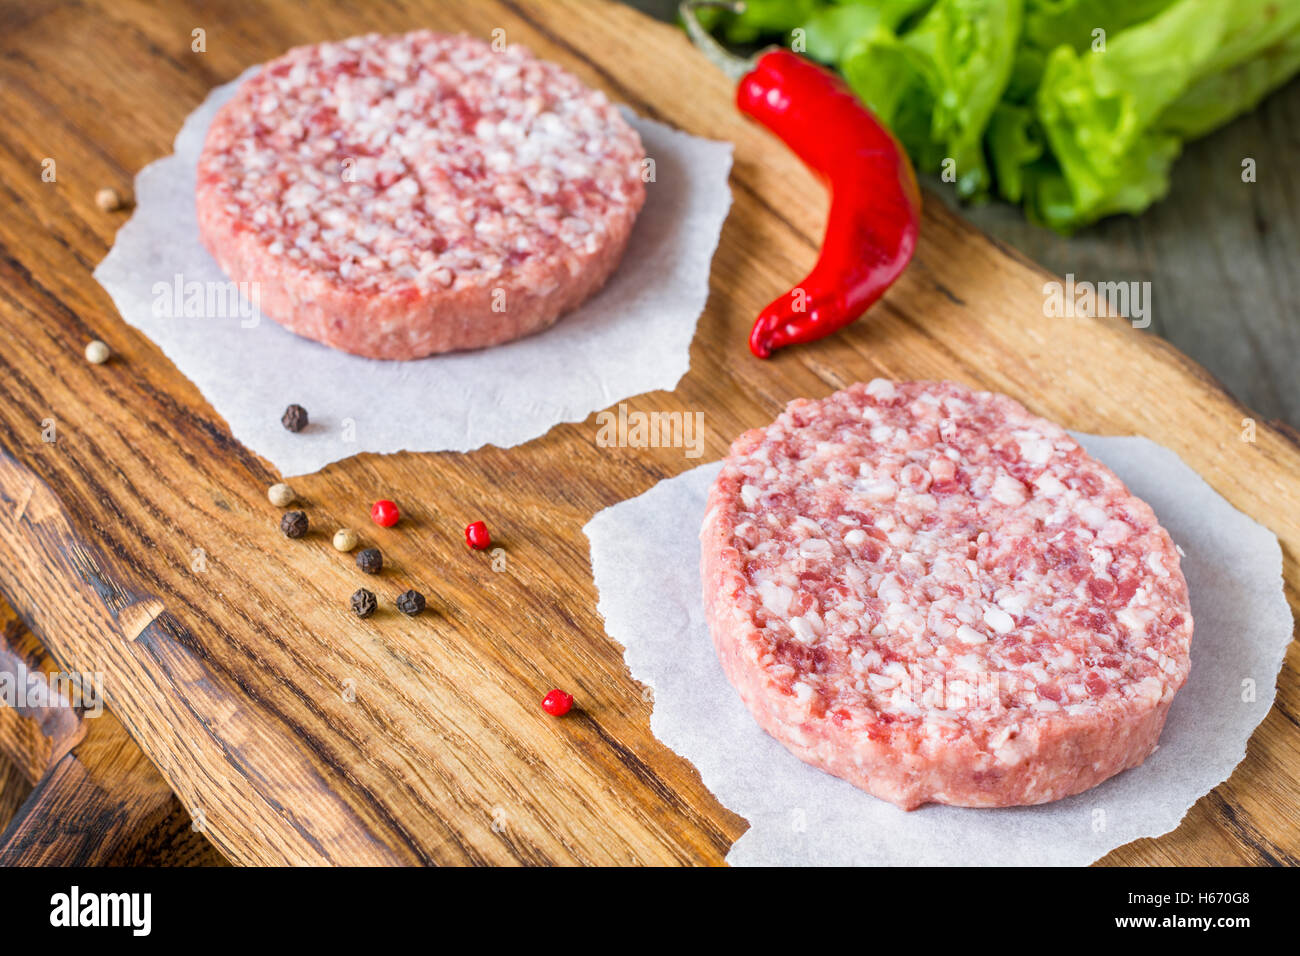 Raw fresh burger meat patties on wooden chopping board. Close up Stock Photo